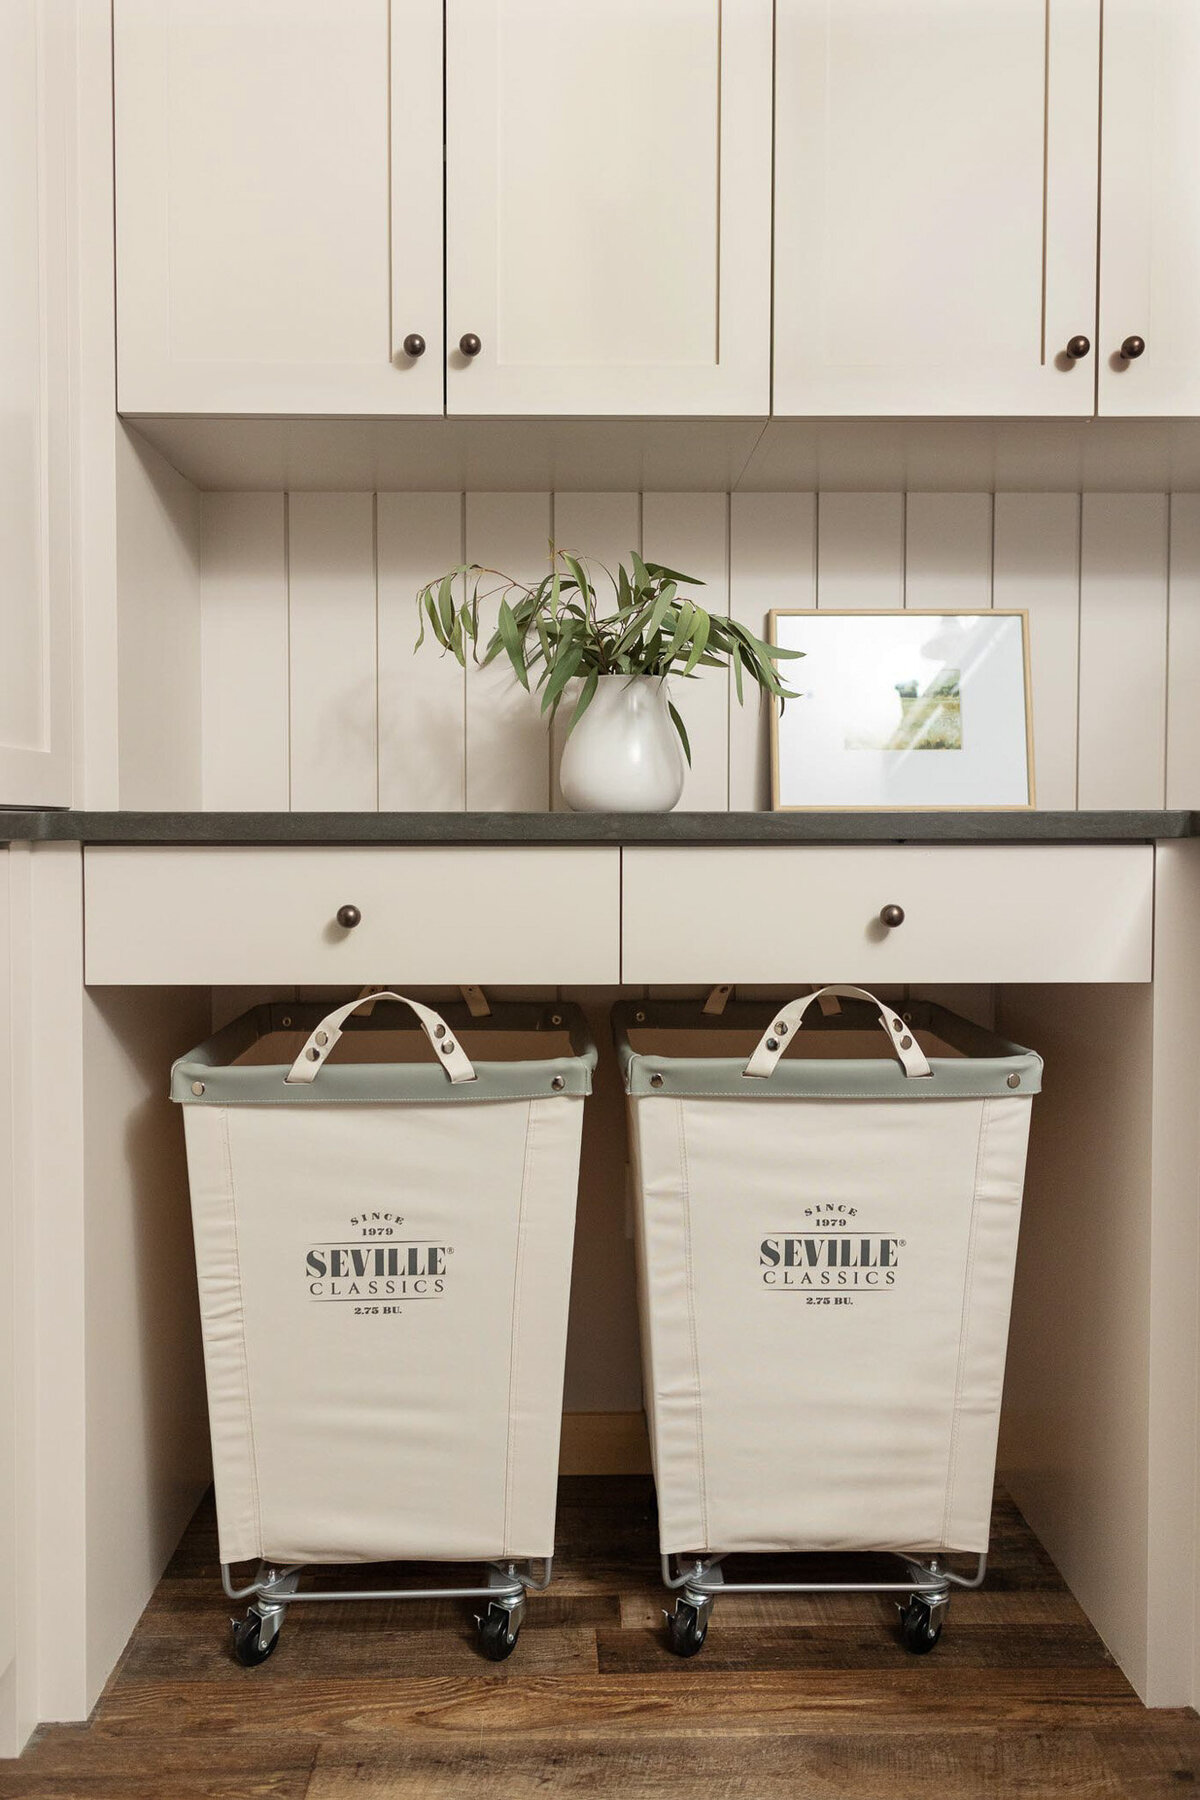 Laundry room with dark brown wood floors. Open shelving area with upholstered laundry hampers on casters. Beige cabinetry and shiplap walls. Beige cabinet with doors with antique bronze knobs. Grey quartz countertops above with open shelving painted beige. Shelves adorned with glass jars of laundry detergent and pods, cleaning spray bottles, towels, jars, and wicker baskets.